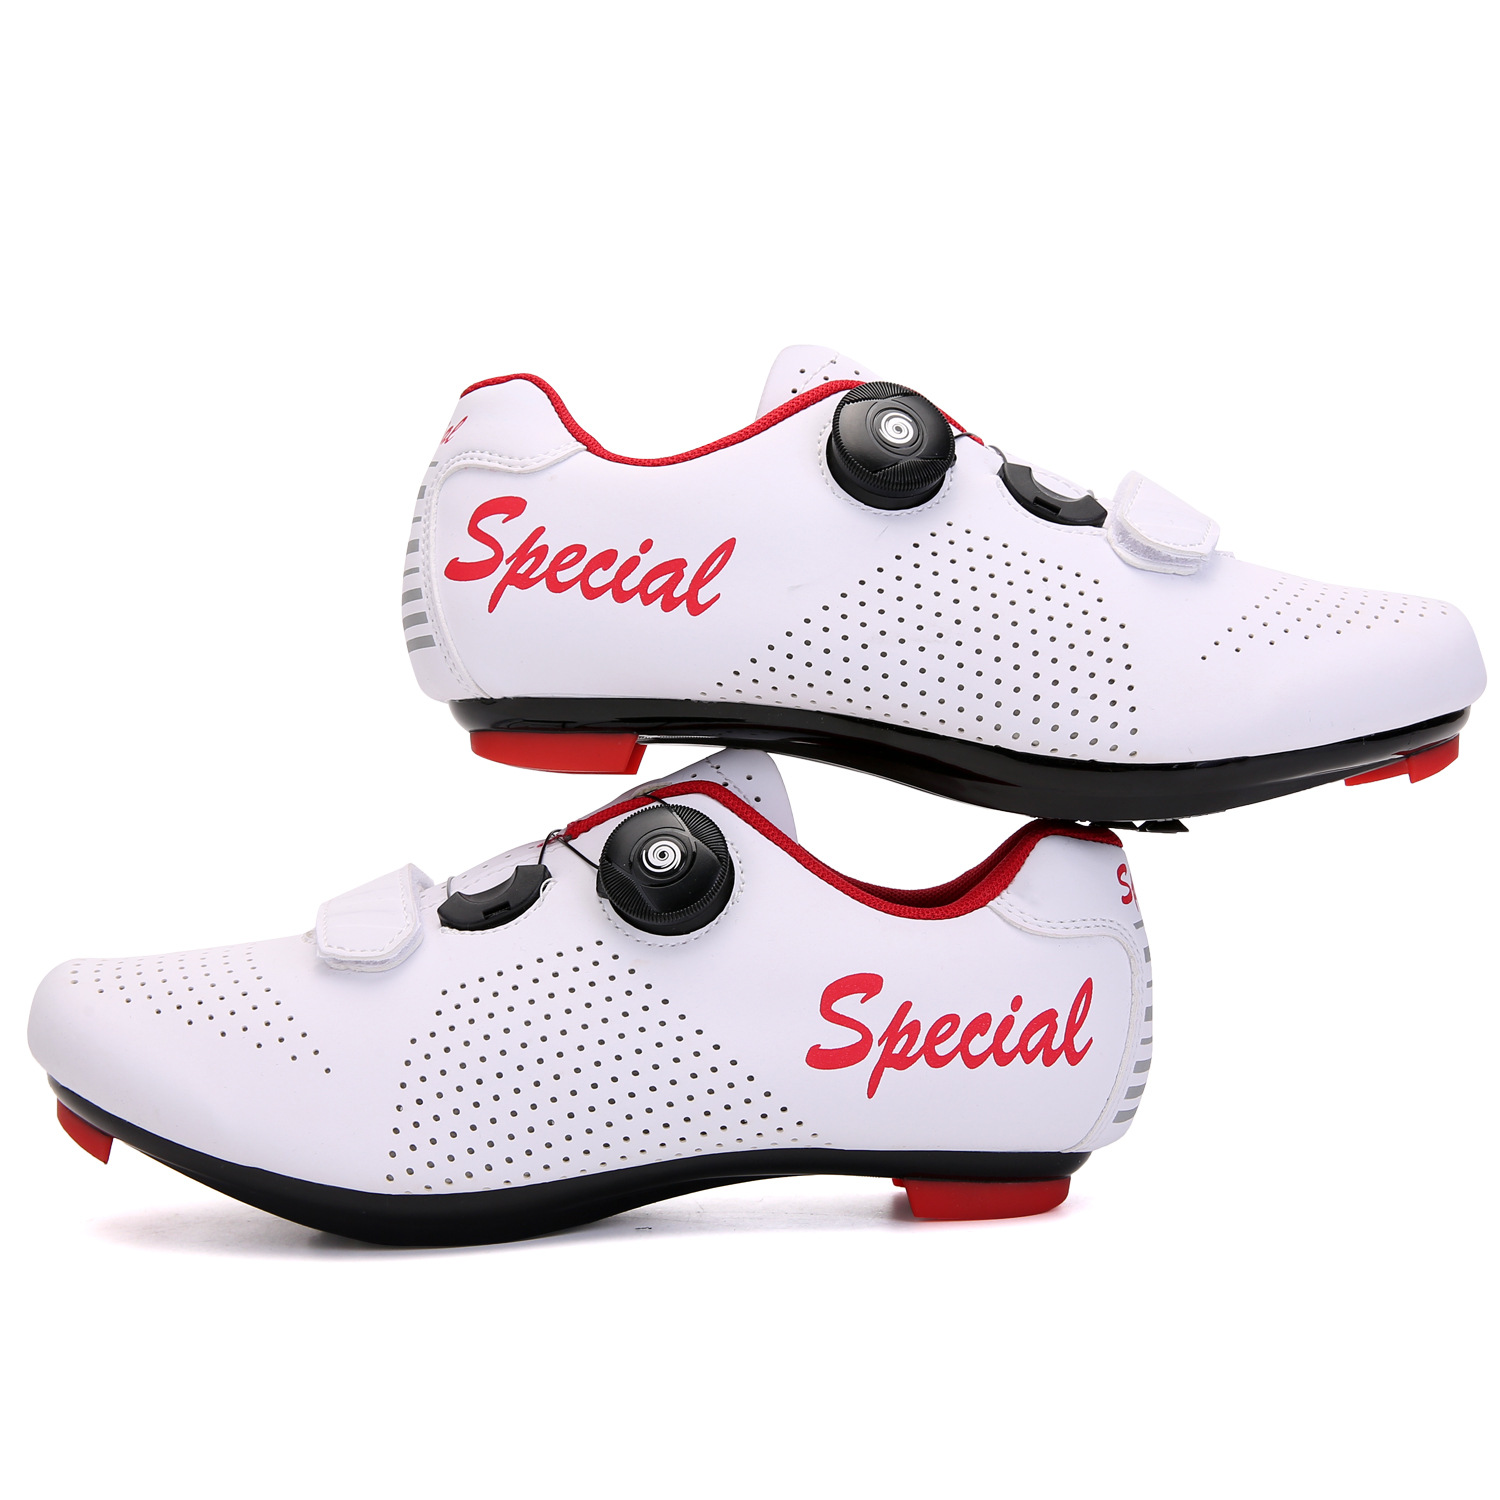 2021 sports cleats cycling shoes outdoor bicycle highway shoes road shoes